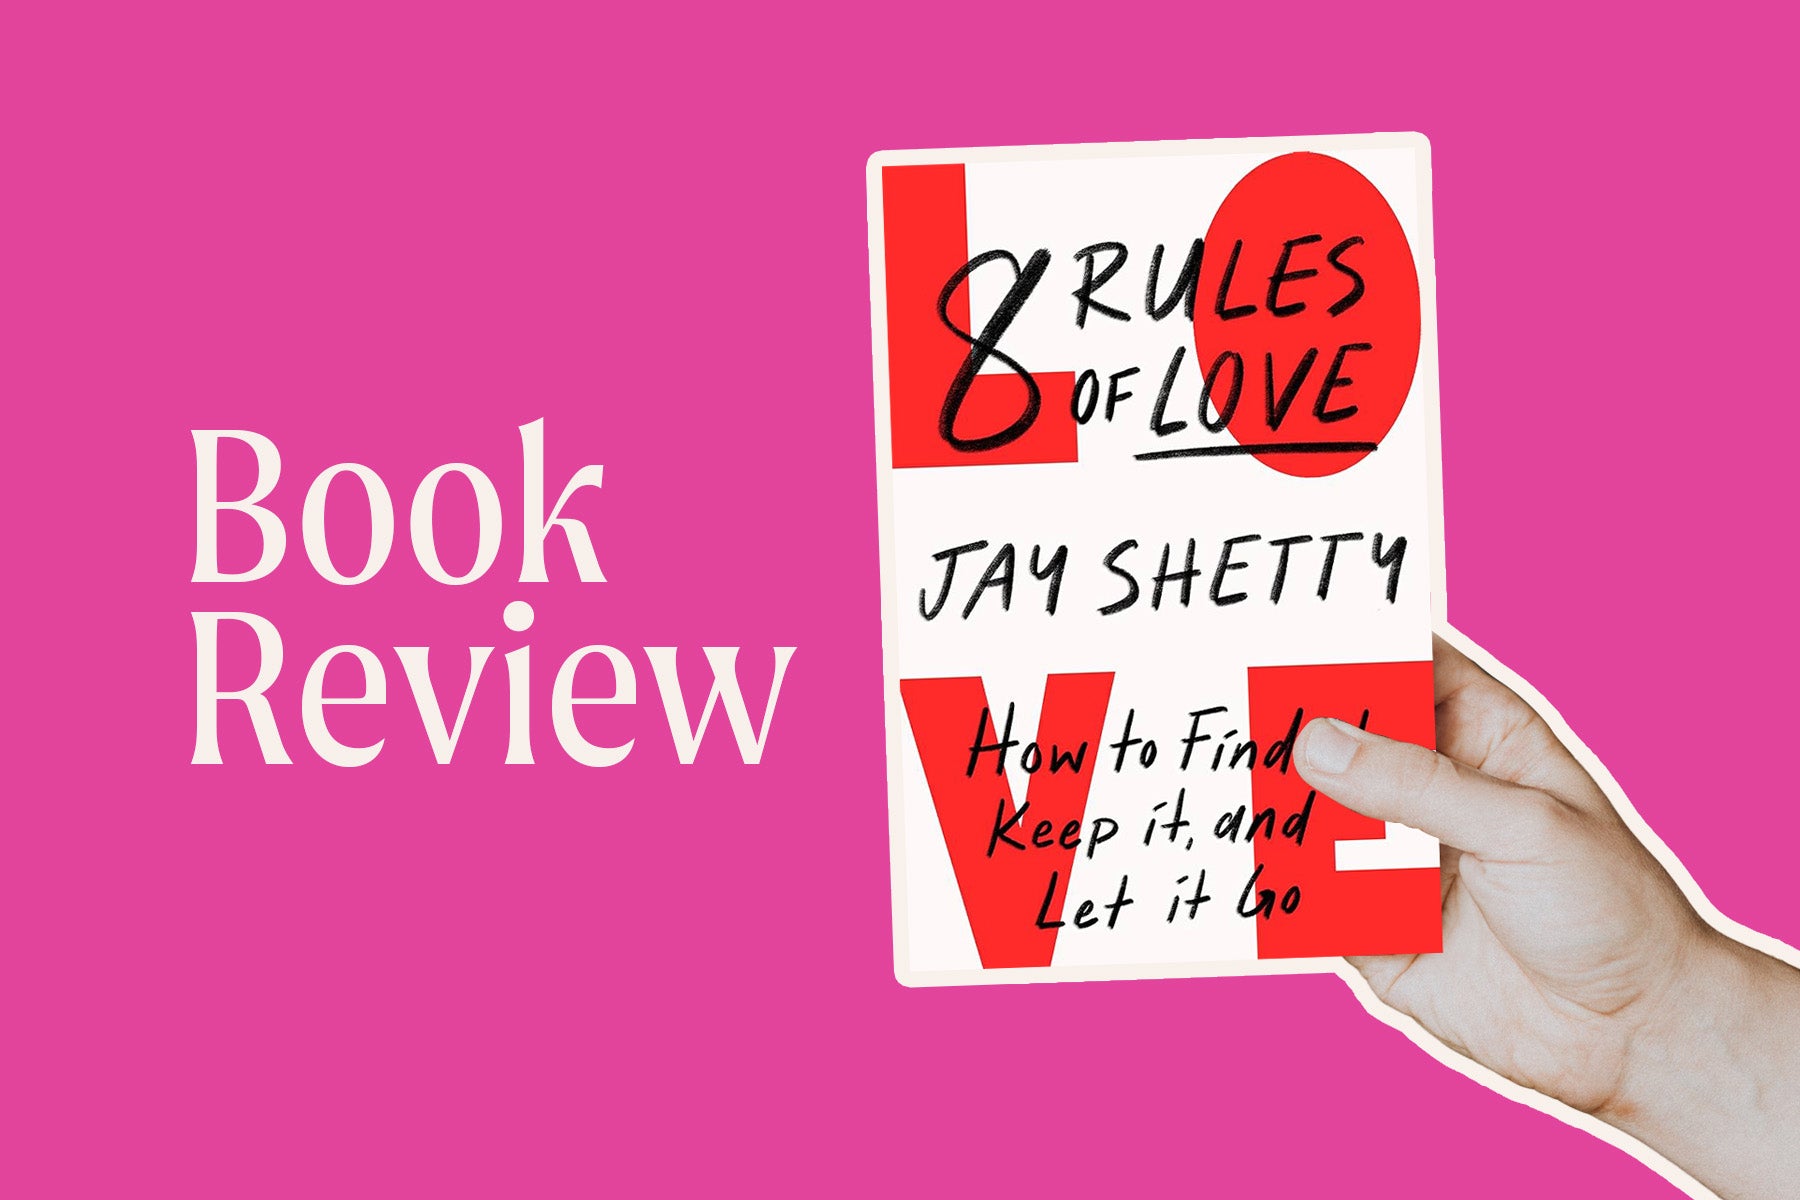 Book Review: 8 Rules of Love : How to Find it, Keep it, and Let it Go by Jay Shetty